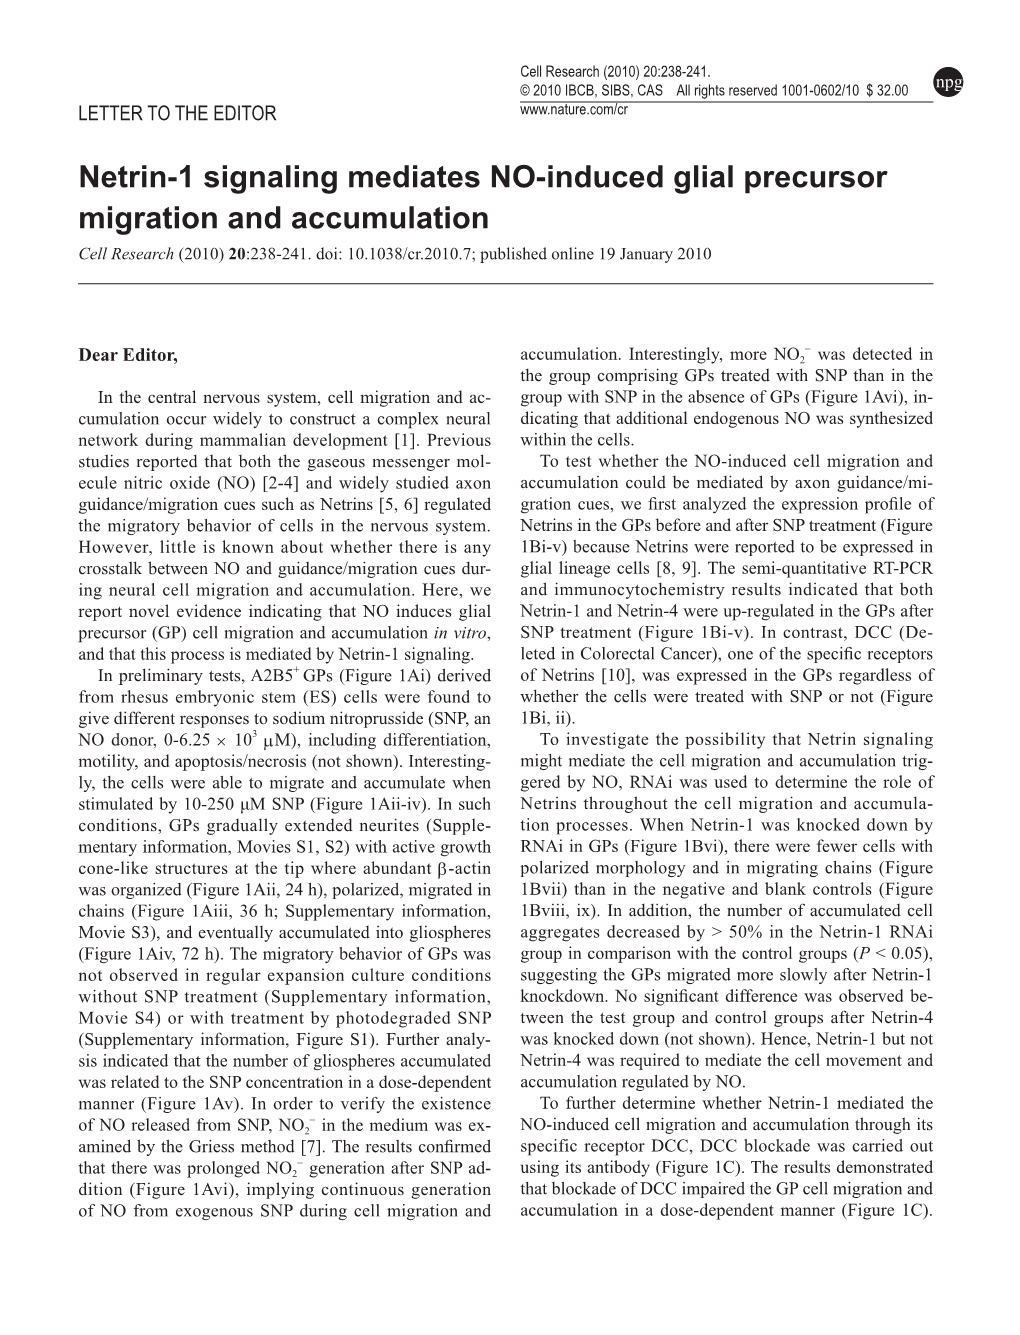 Netrin-1 Signaling Mediates NO-Induced Glial Precursor Migration and Accumulation Cell Research (2010) 20:238-241